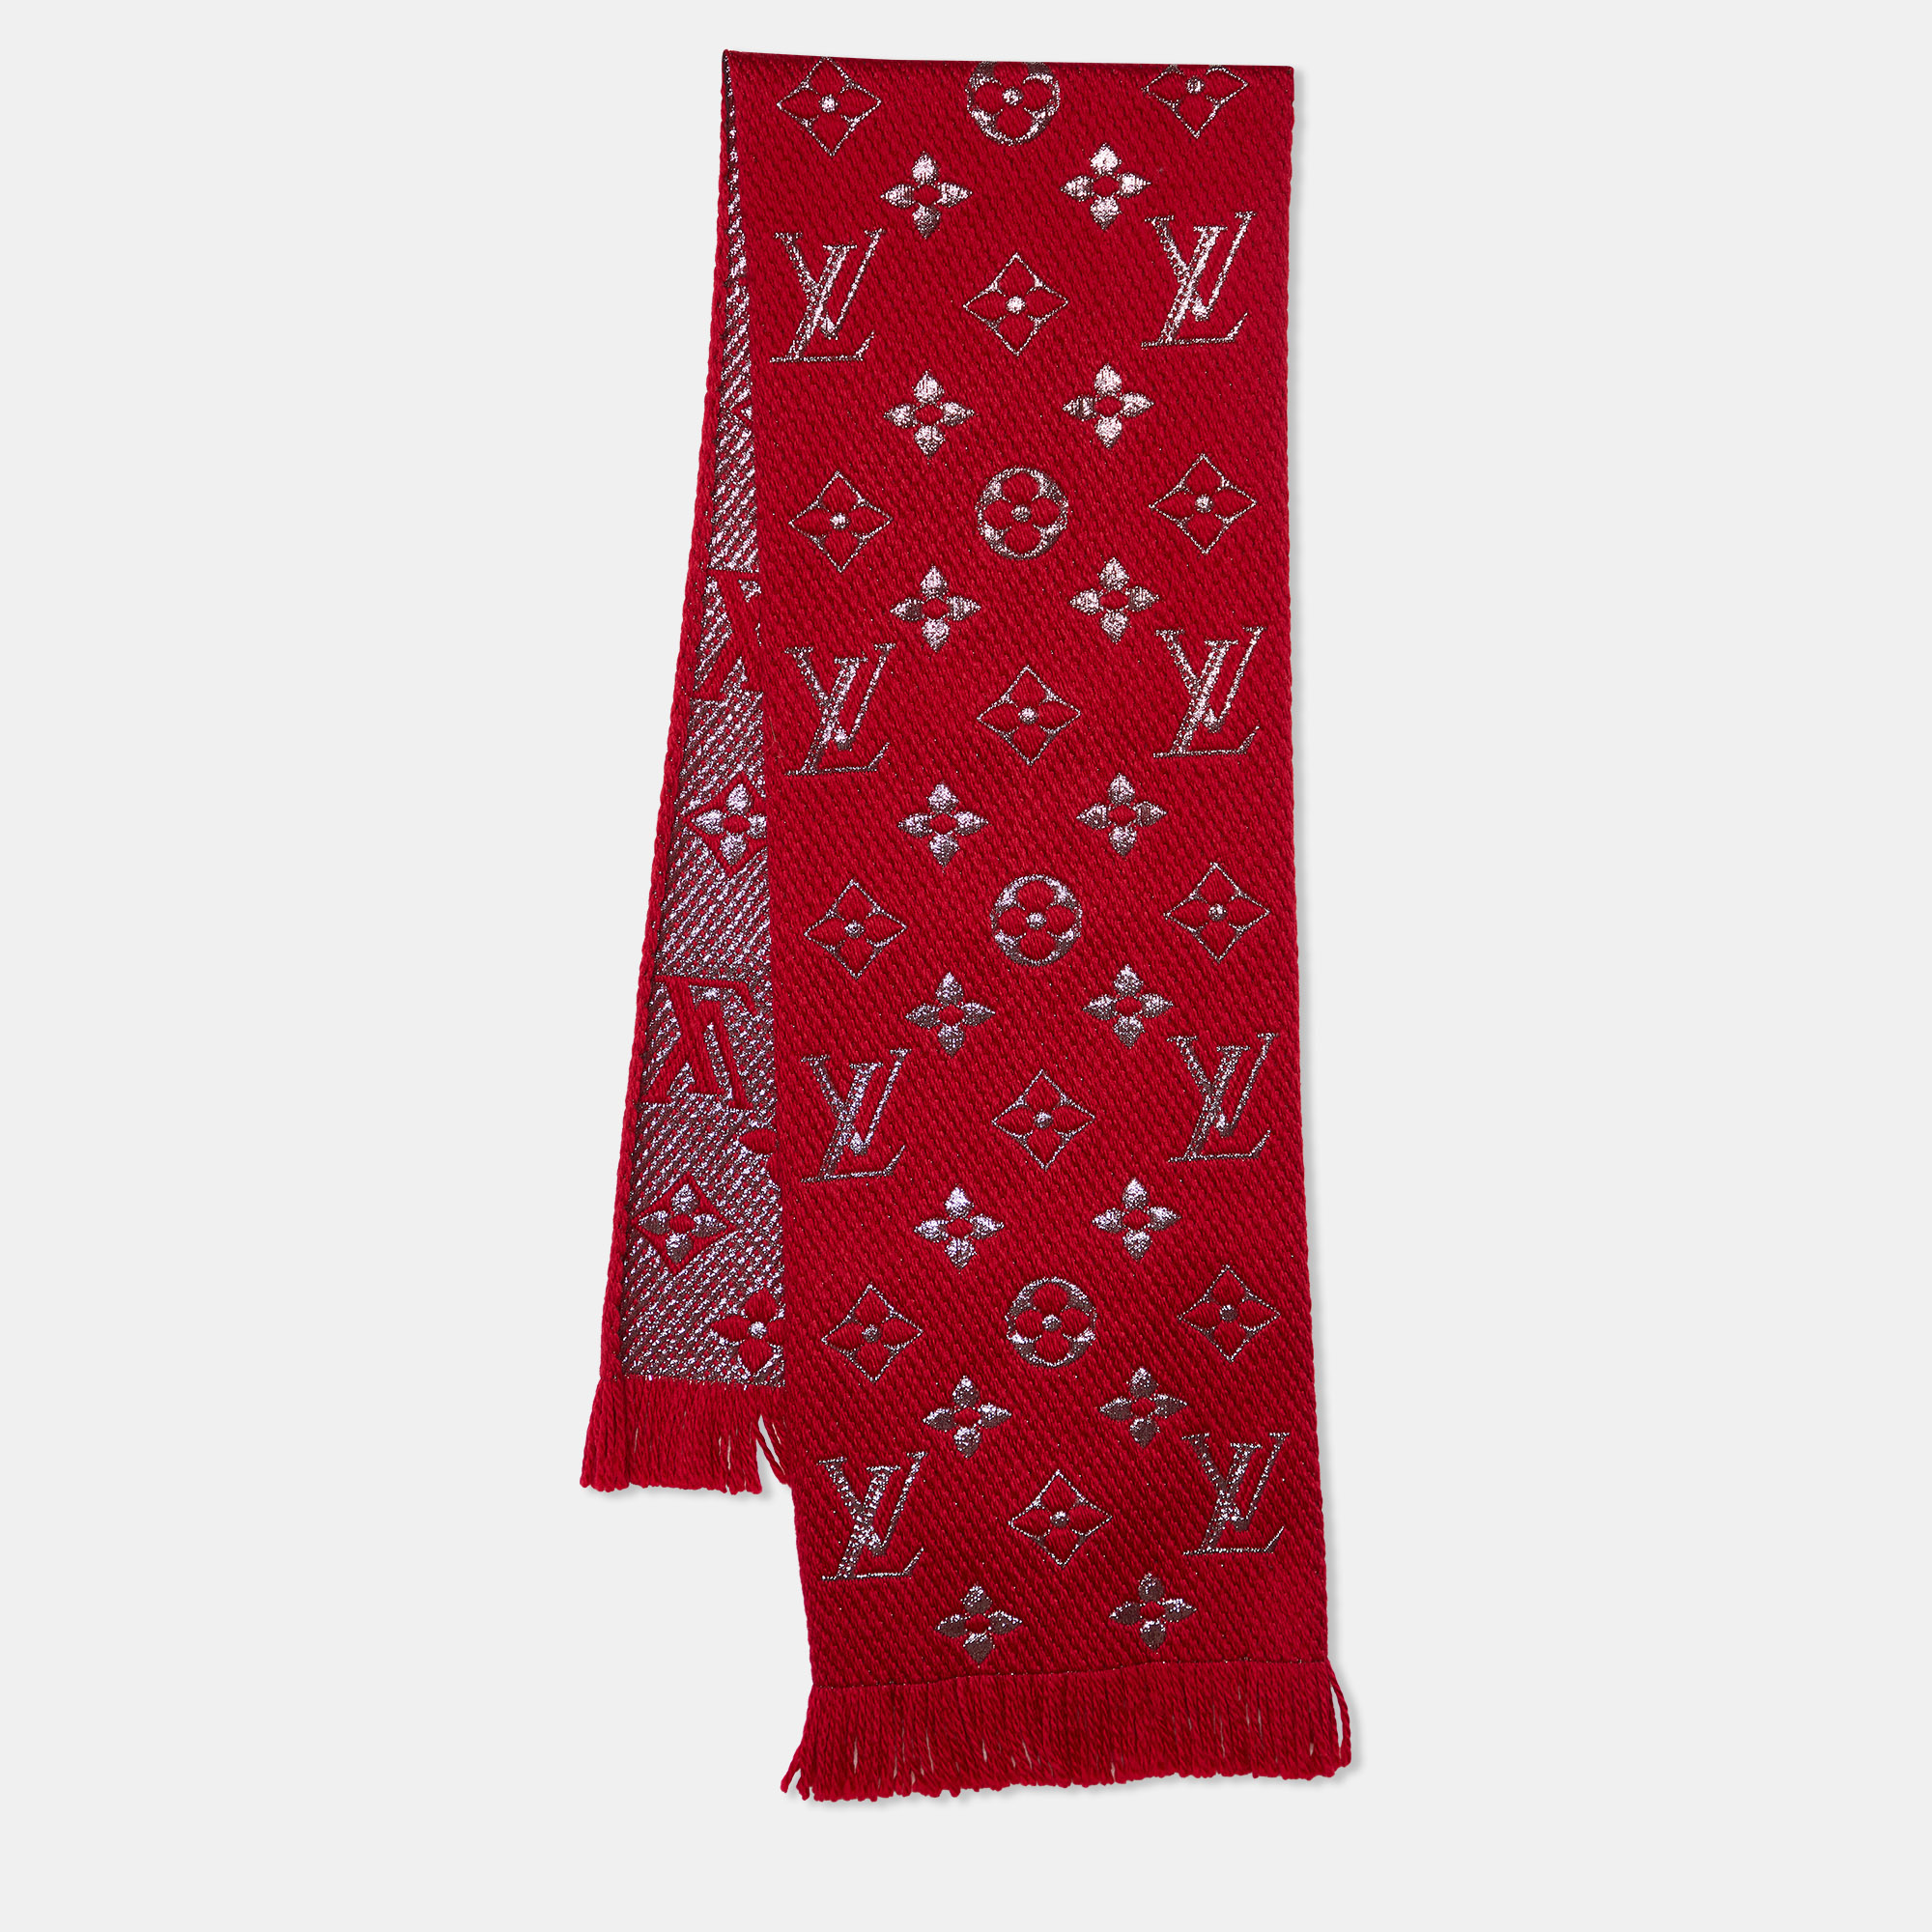 Silk Scarves Louis Vuitton Louis Vuitton Embossed Fringed Scarf in Red Wool